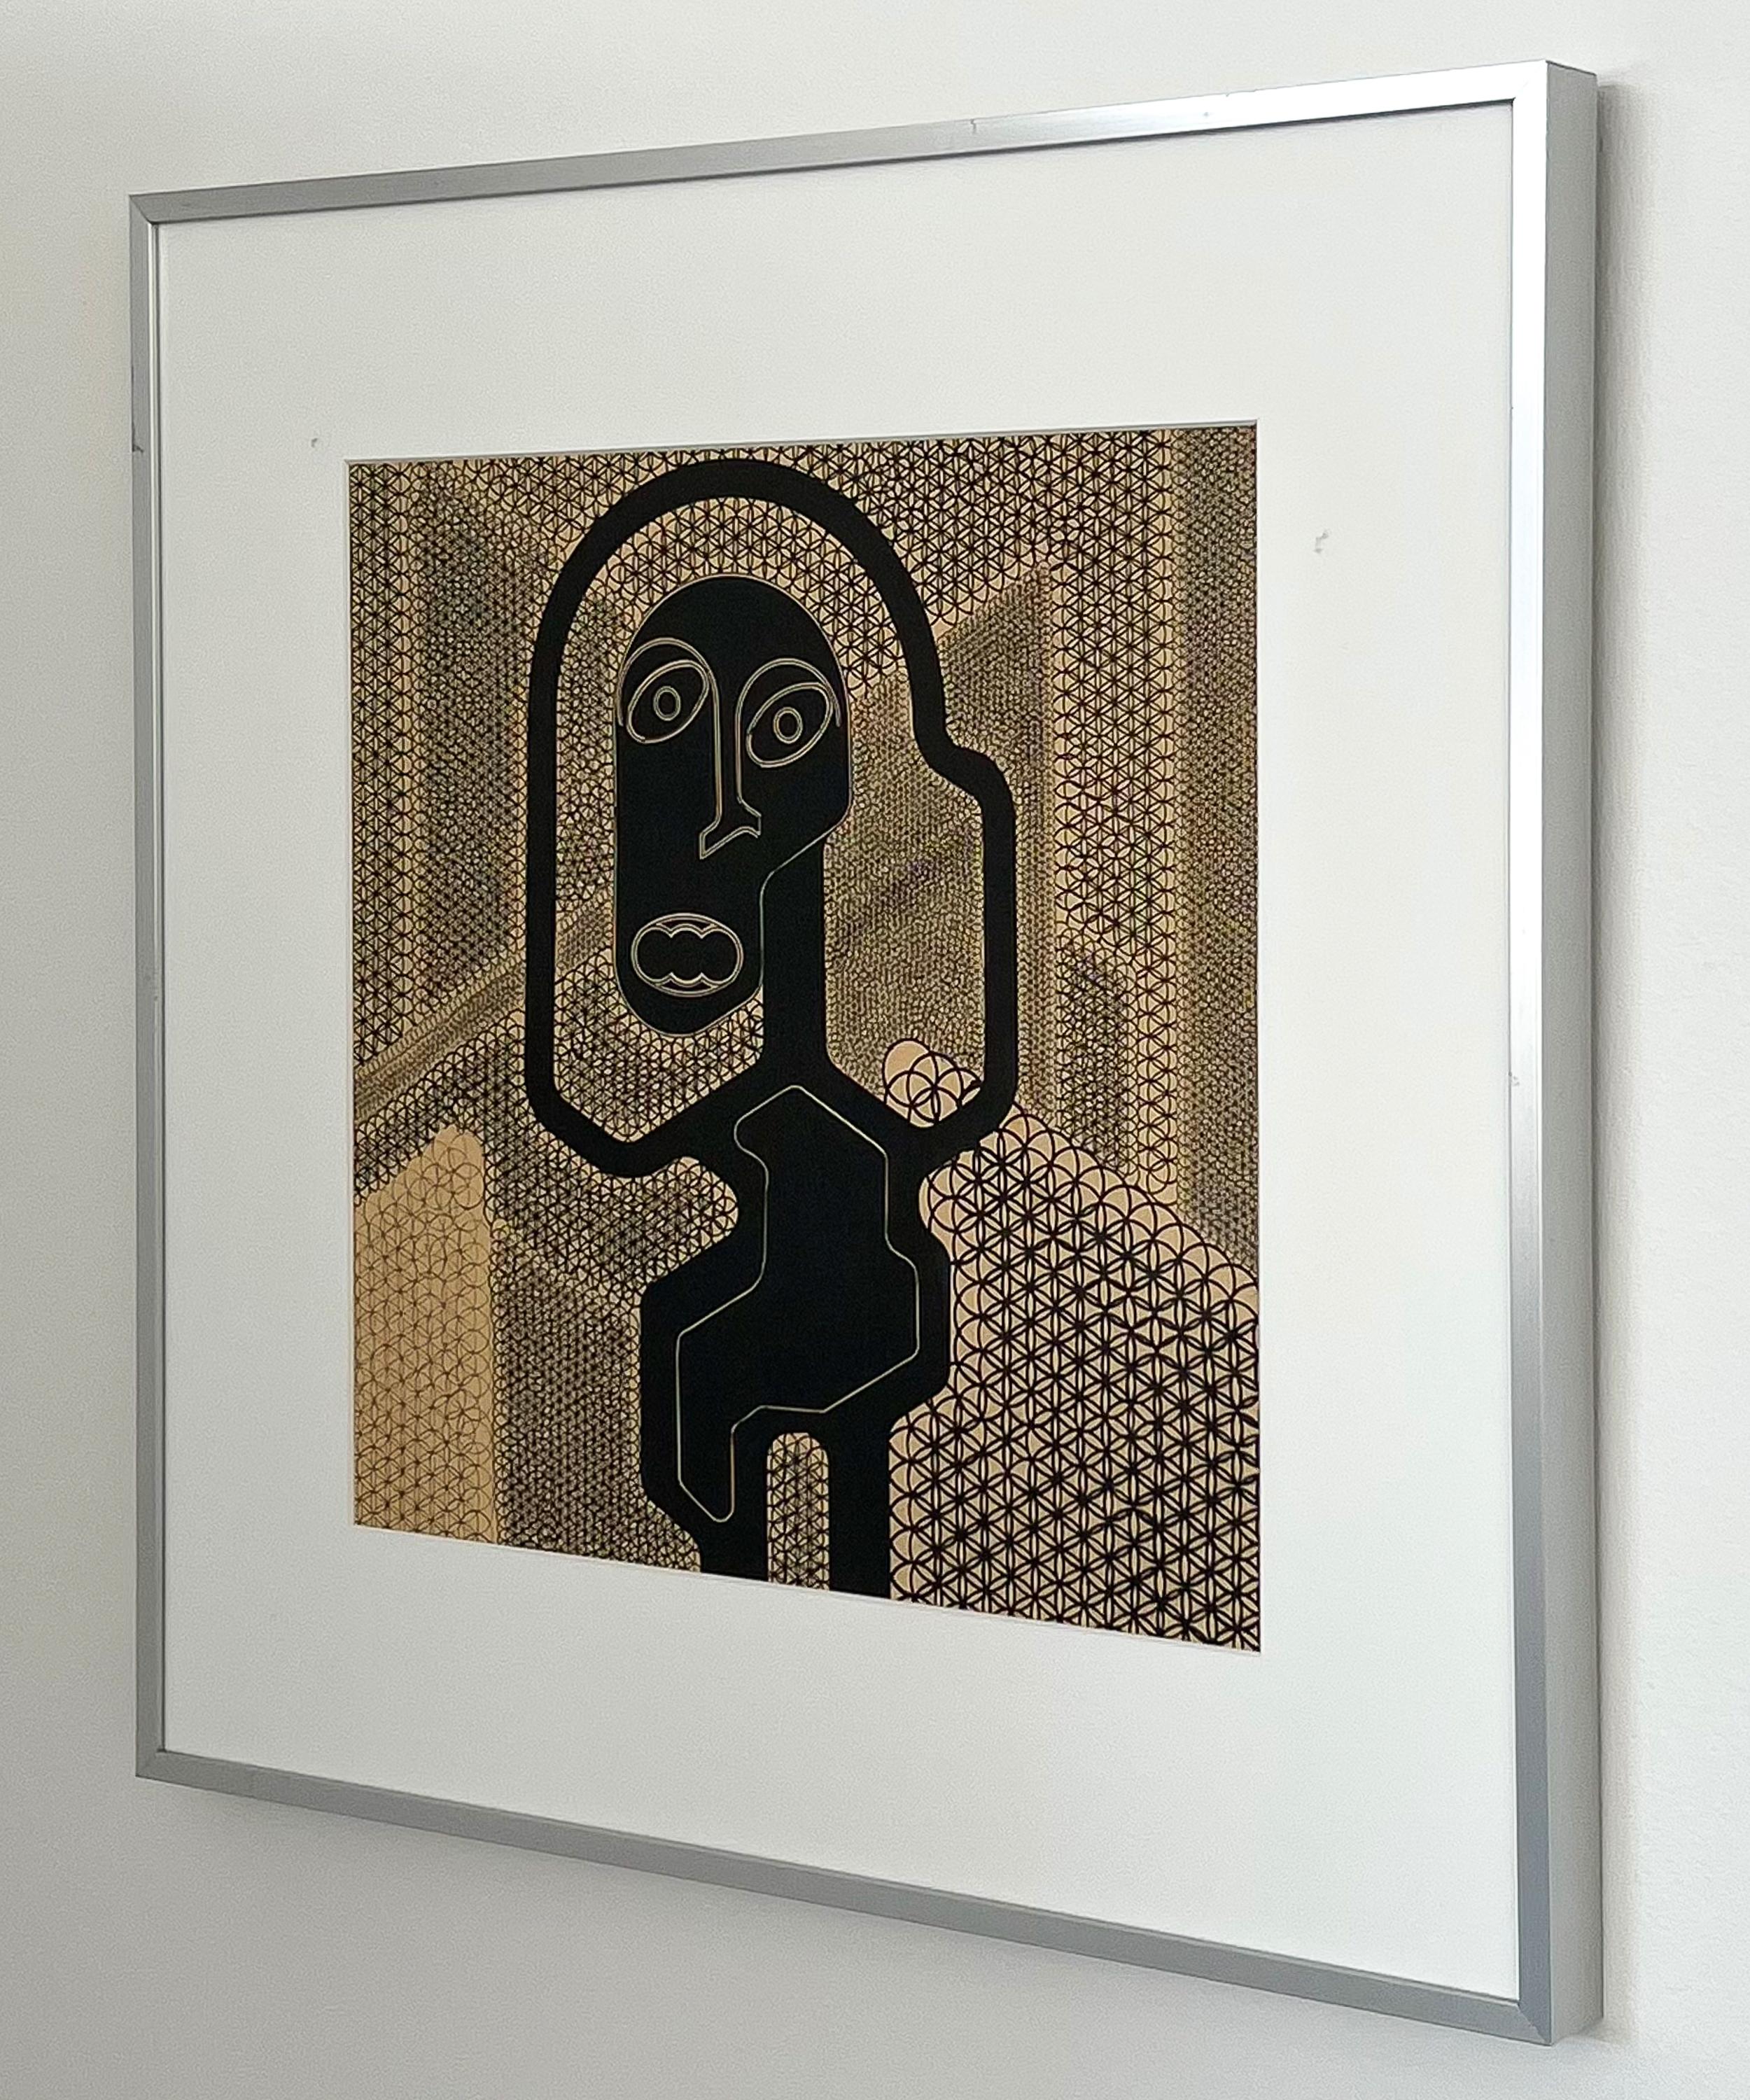 Pierre-Francois Vaysse framed modern abstract drawing, Belgium circa 1970. Intricate ink drawing on paper of abstract / surreal anthropomorphic figure. Black ink on beige background. Newly matted in white within the original aluminum frame behind